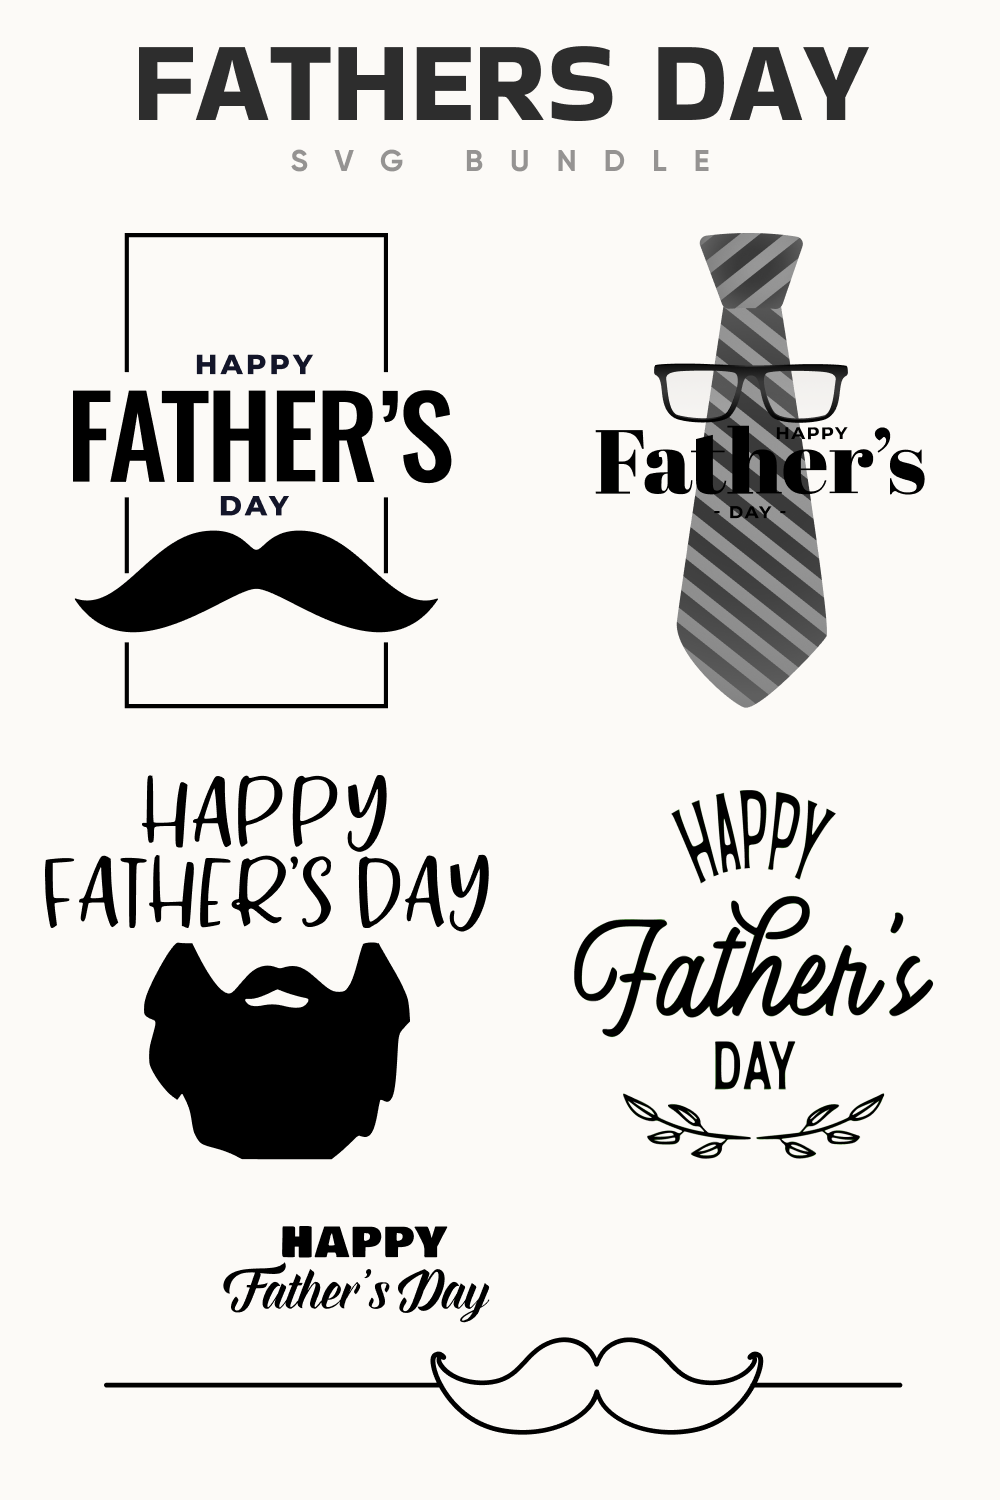 Cool father's day elements.